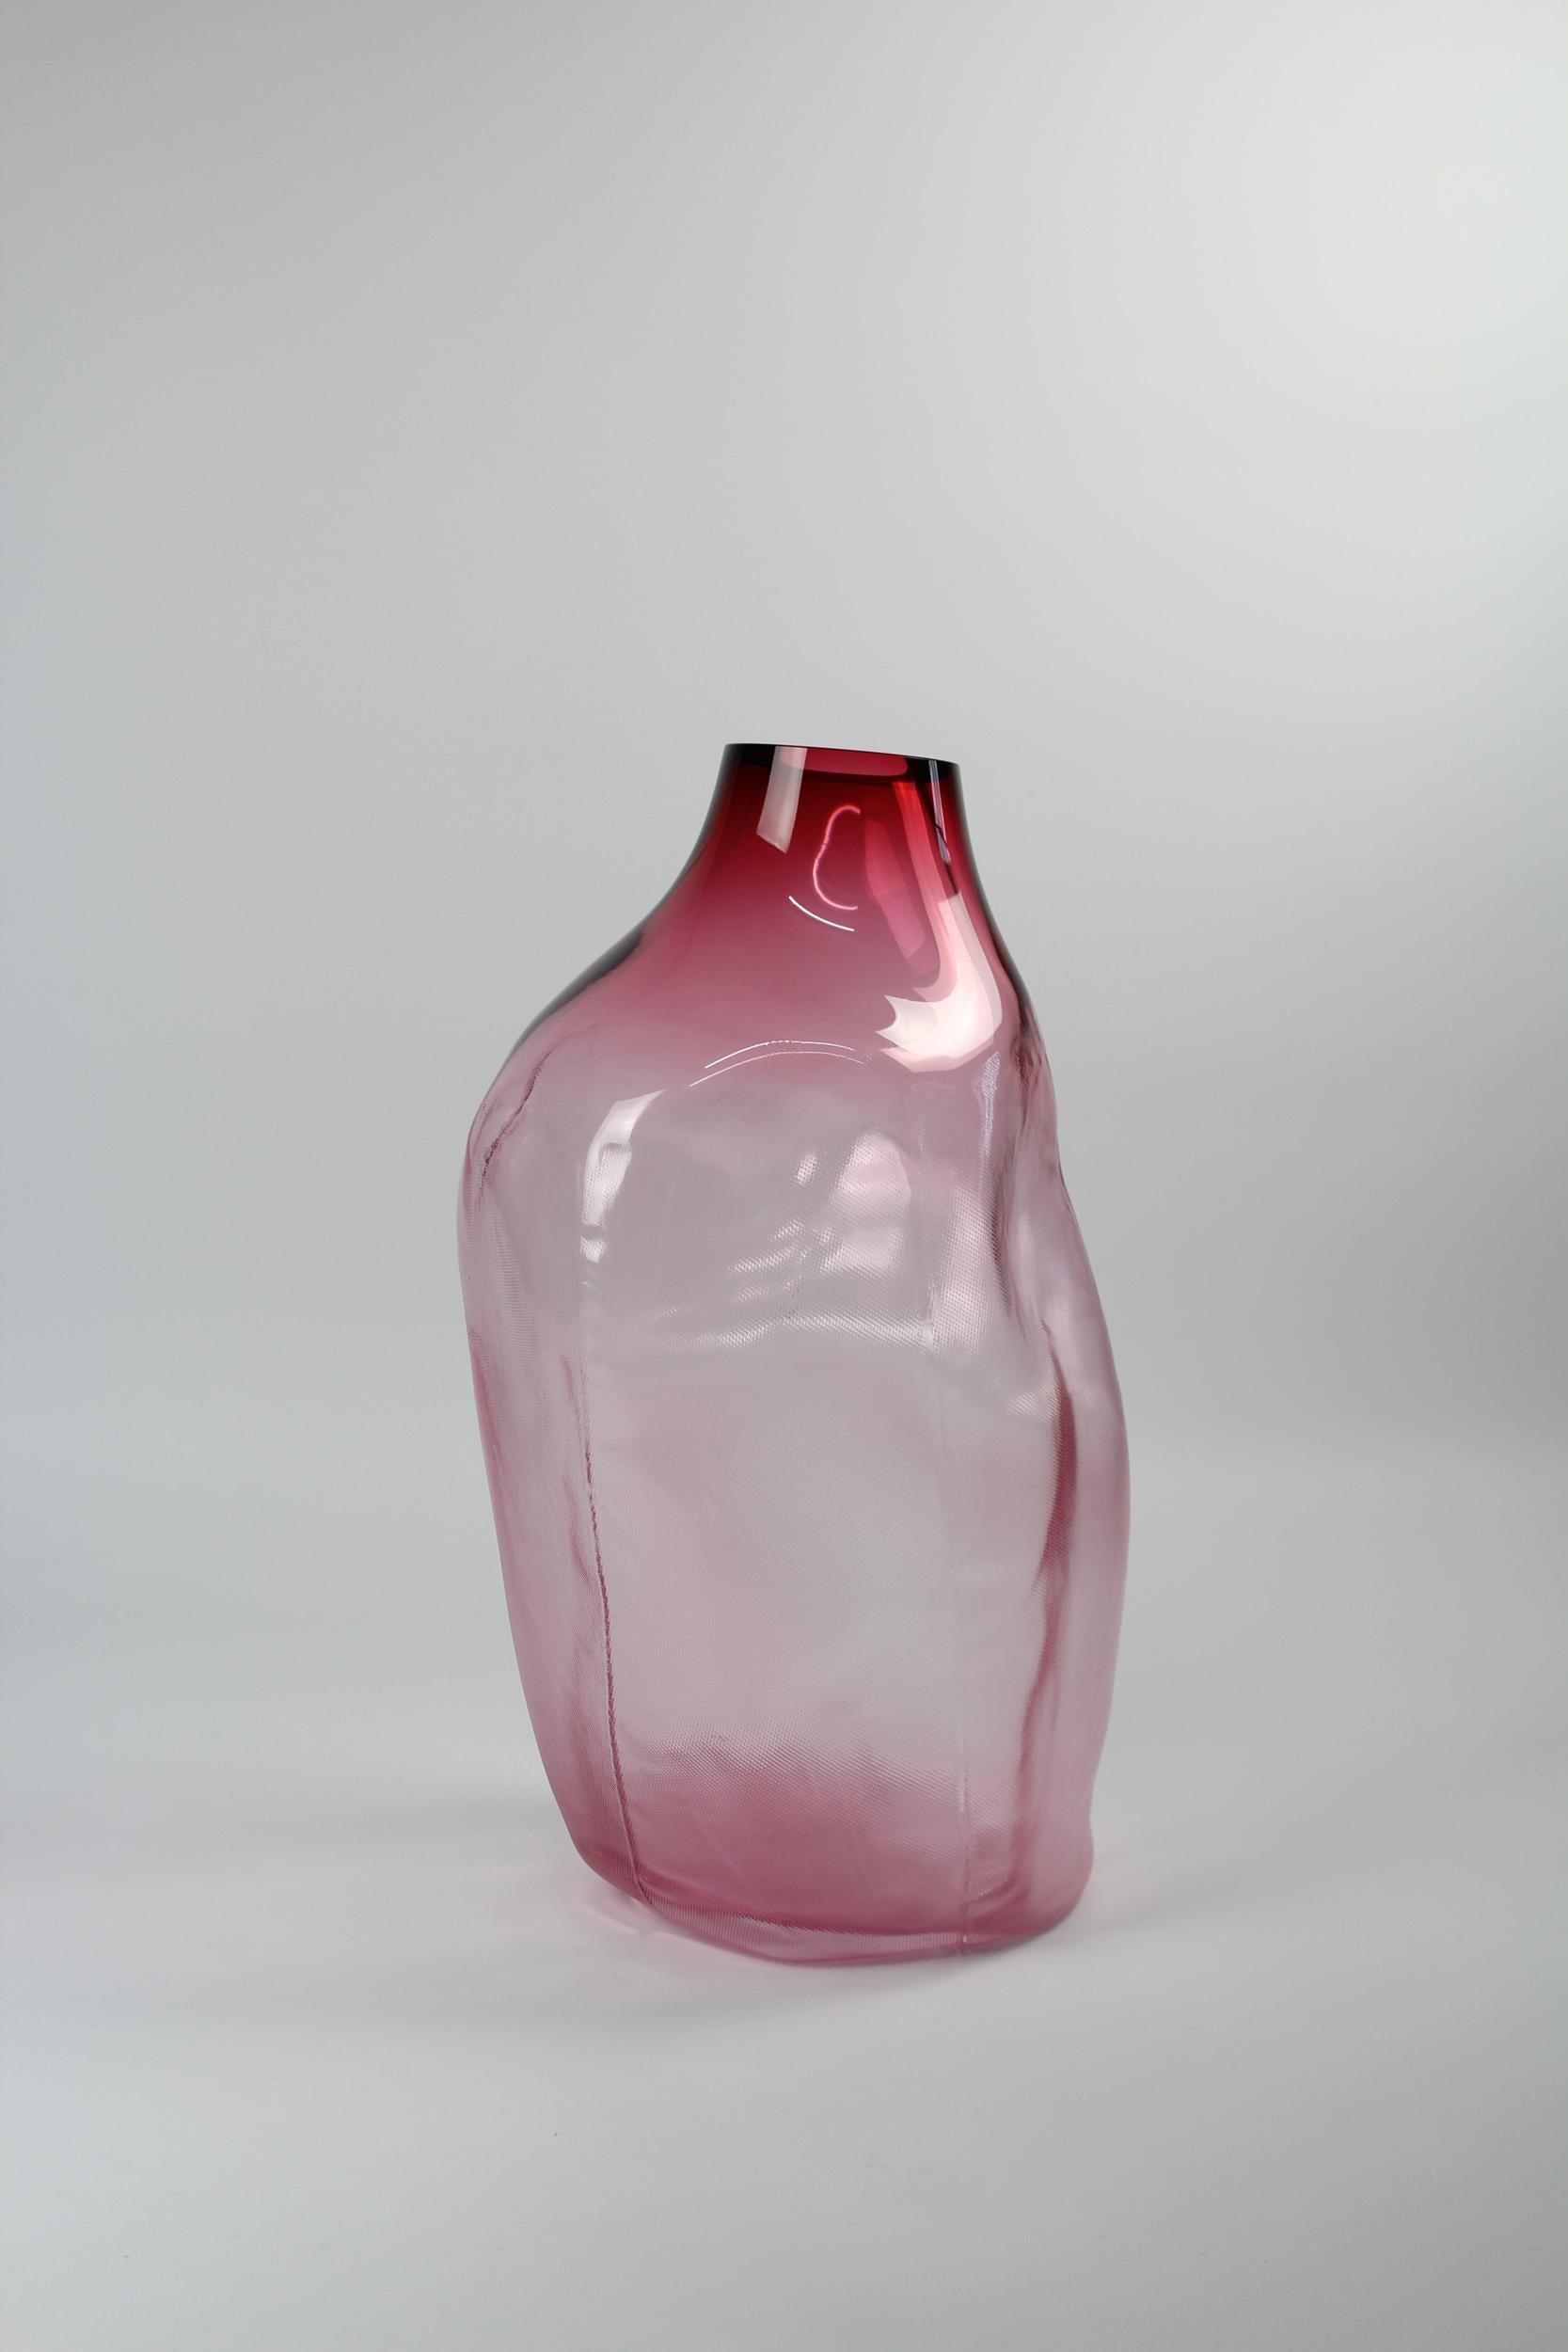 105 Ltr Forms, Fuchsia, Handmade Glass Object by Vogel Studio In New Condition For Sale In Sarstedt, NI